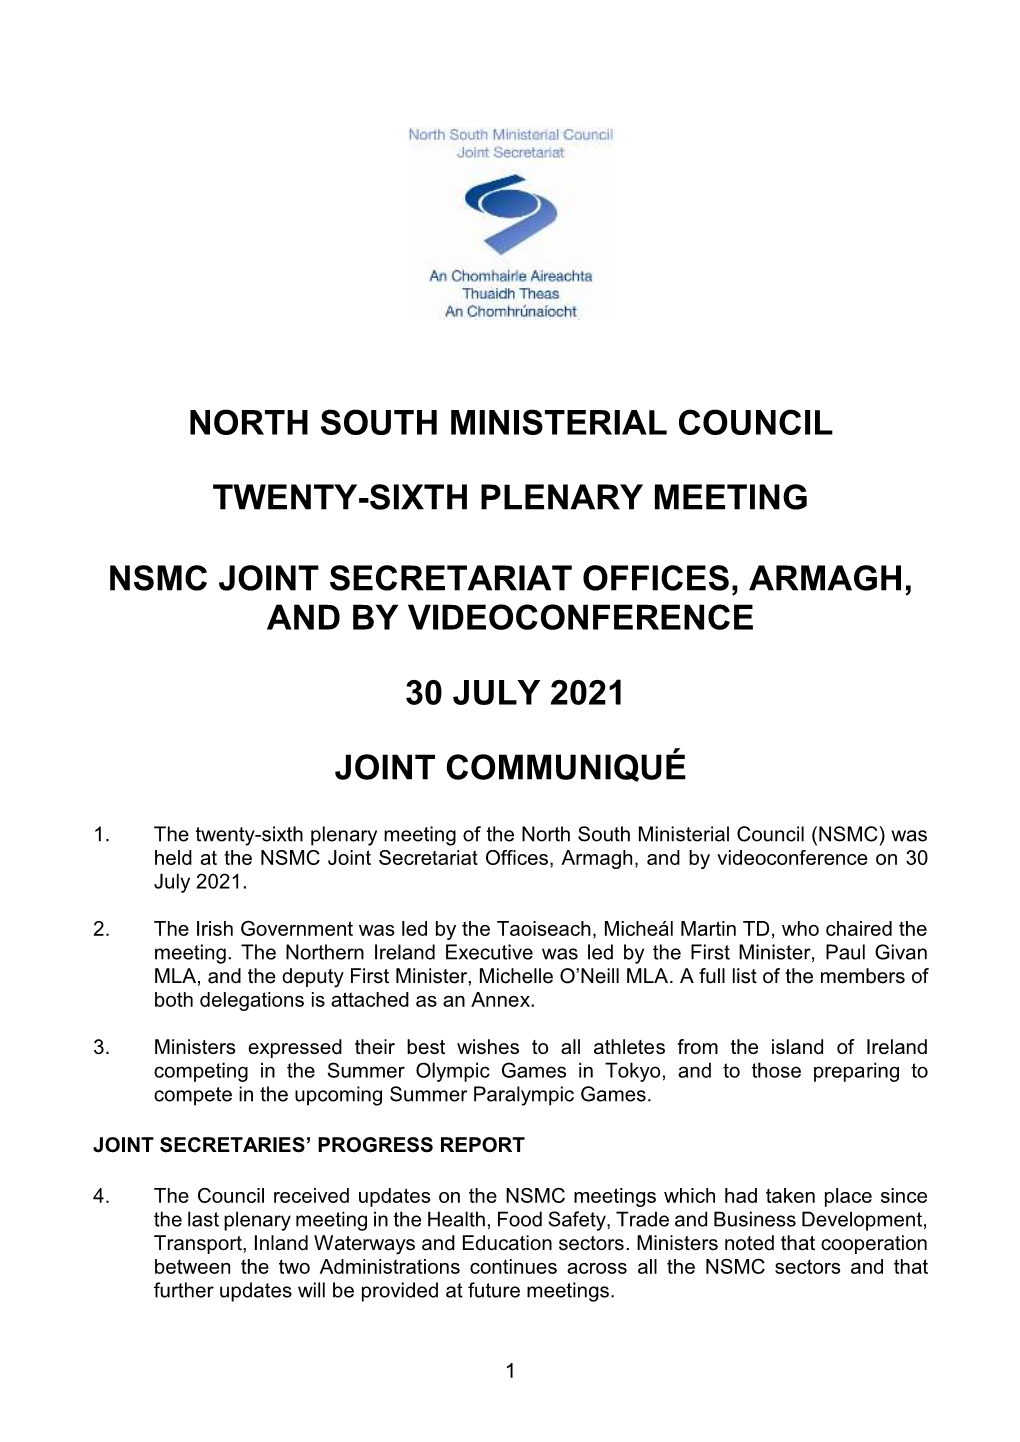 North South Ministerial Council Twenty-Sixth Plenary Meeting Nsmc Joint Secretariat Offices, Armagh, and by Videoconference 30 July 2021 Joint Communiqué